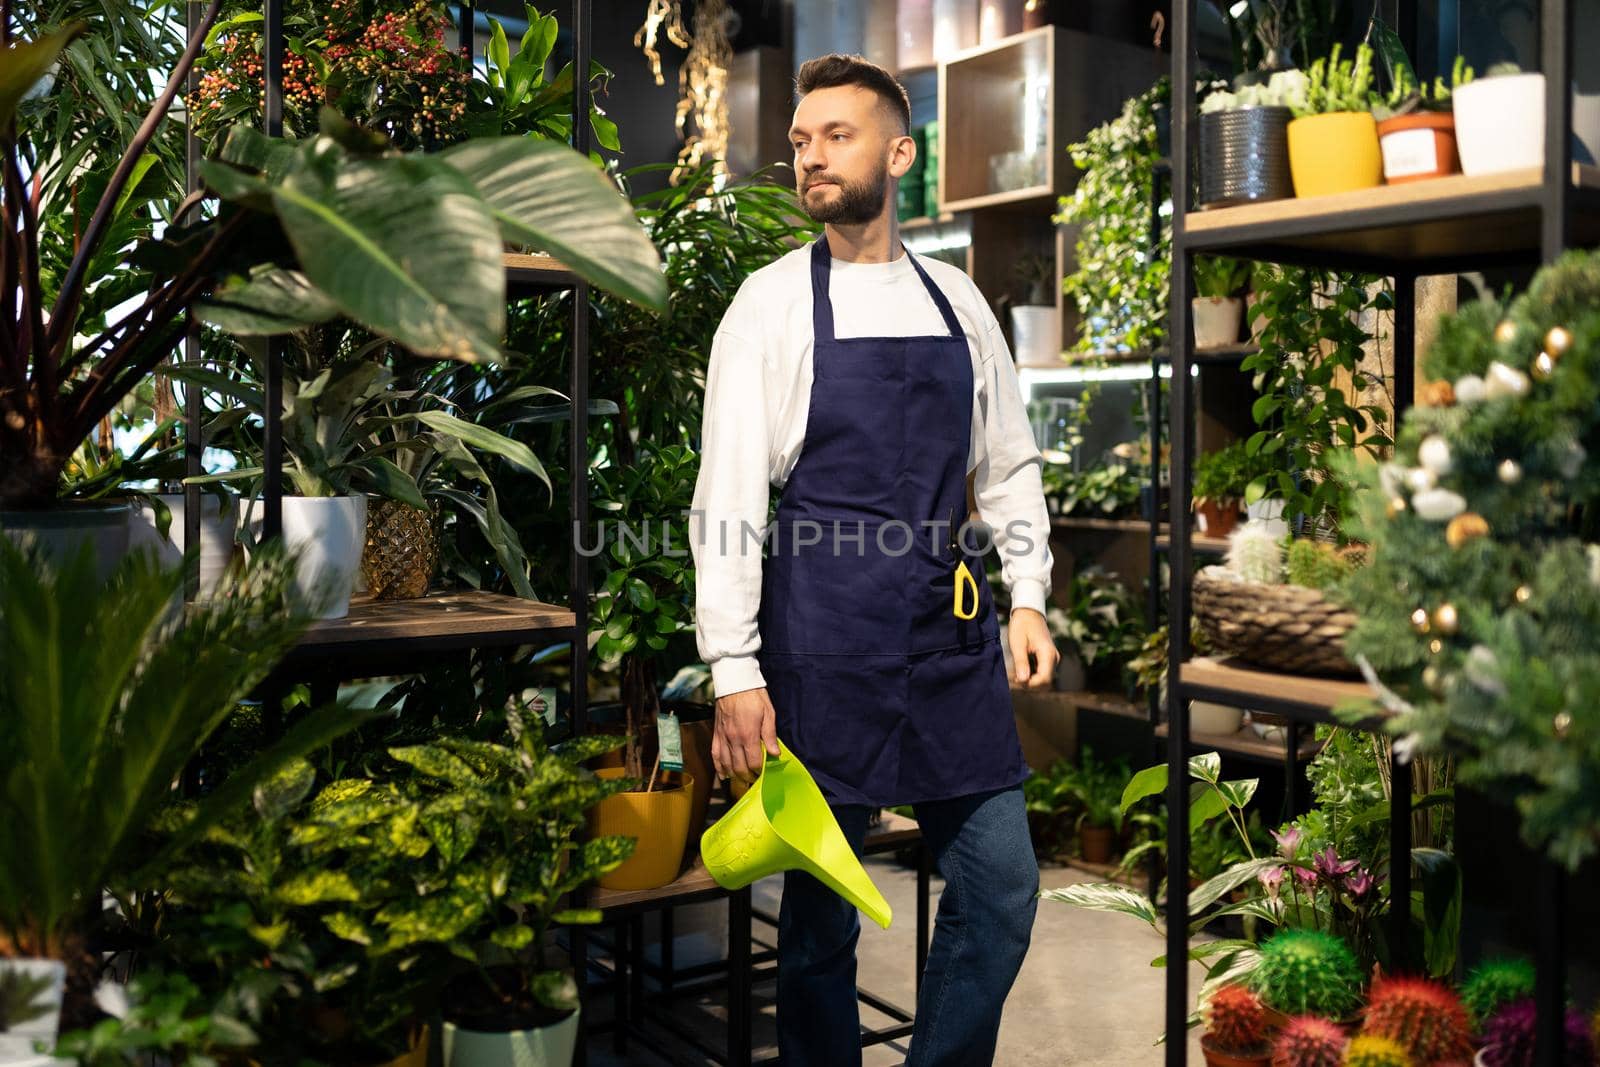 male florist In the garden center with a watering can For wildflowers in his hands.